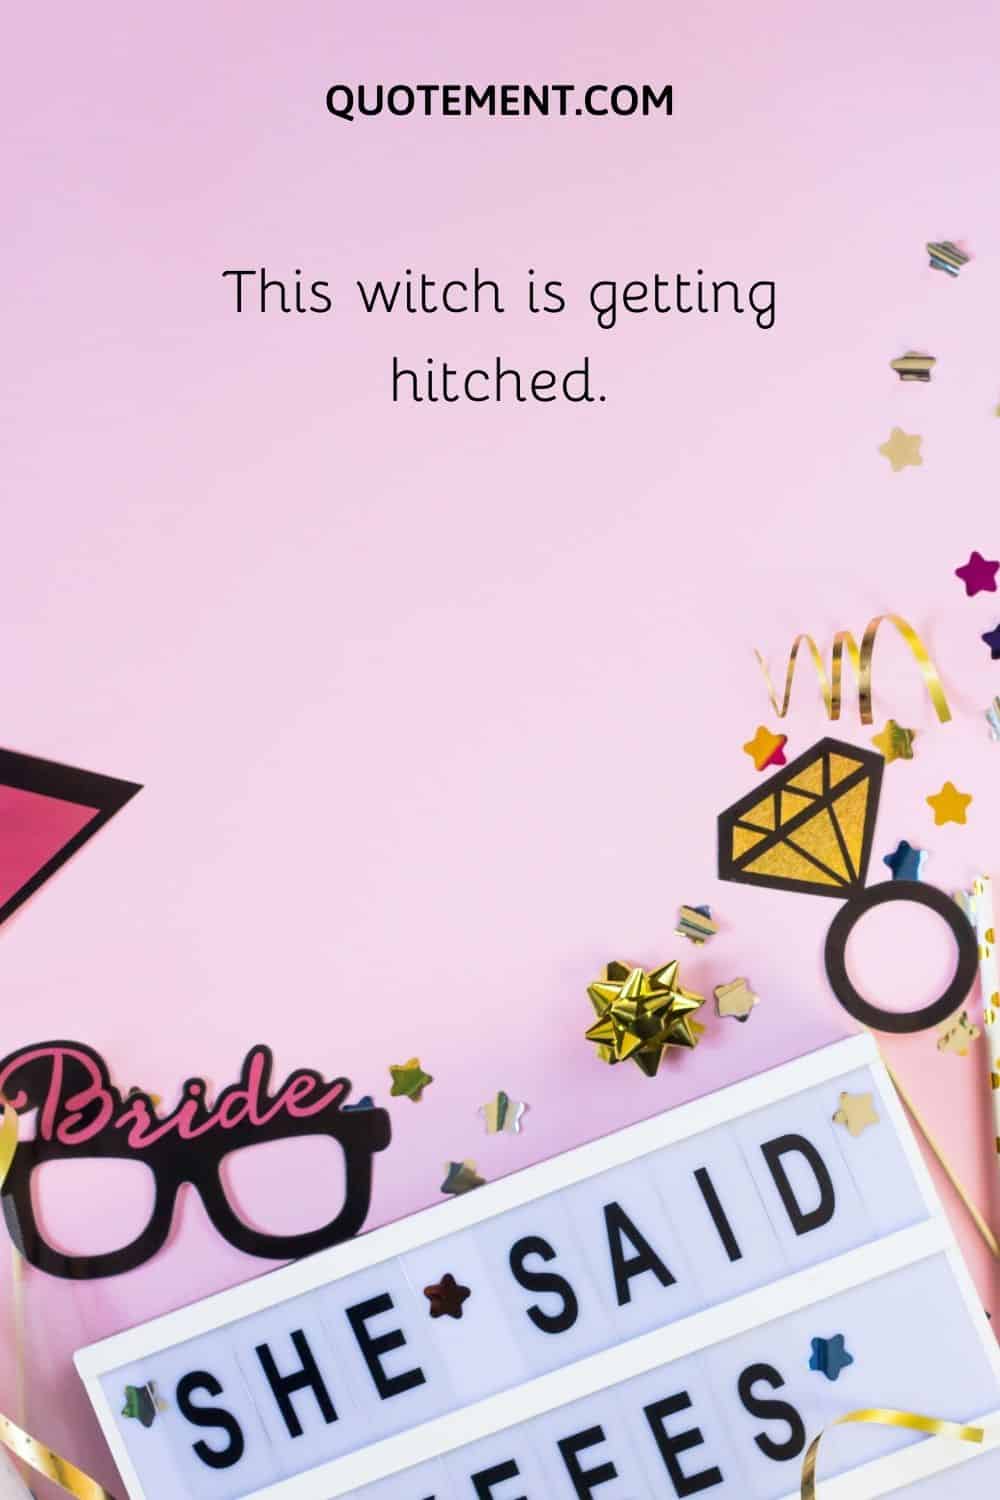 This witch is getting hitched.